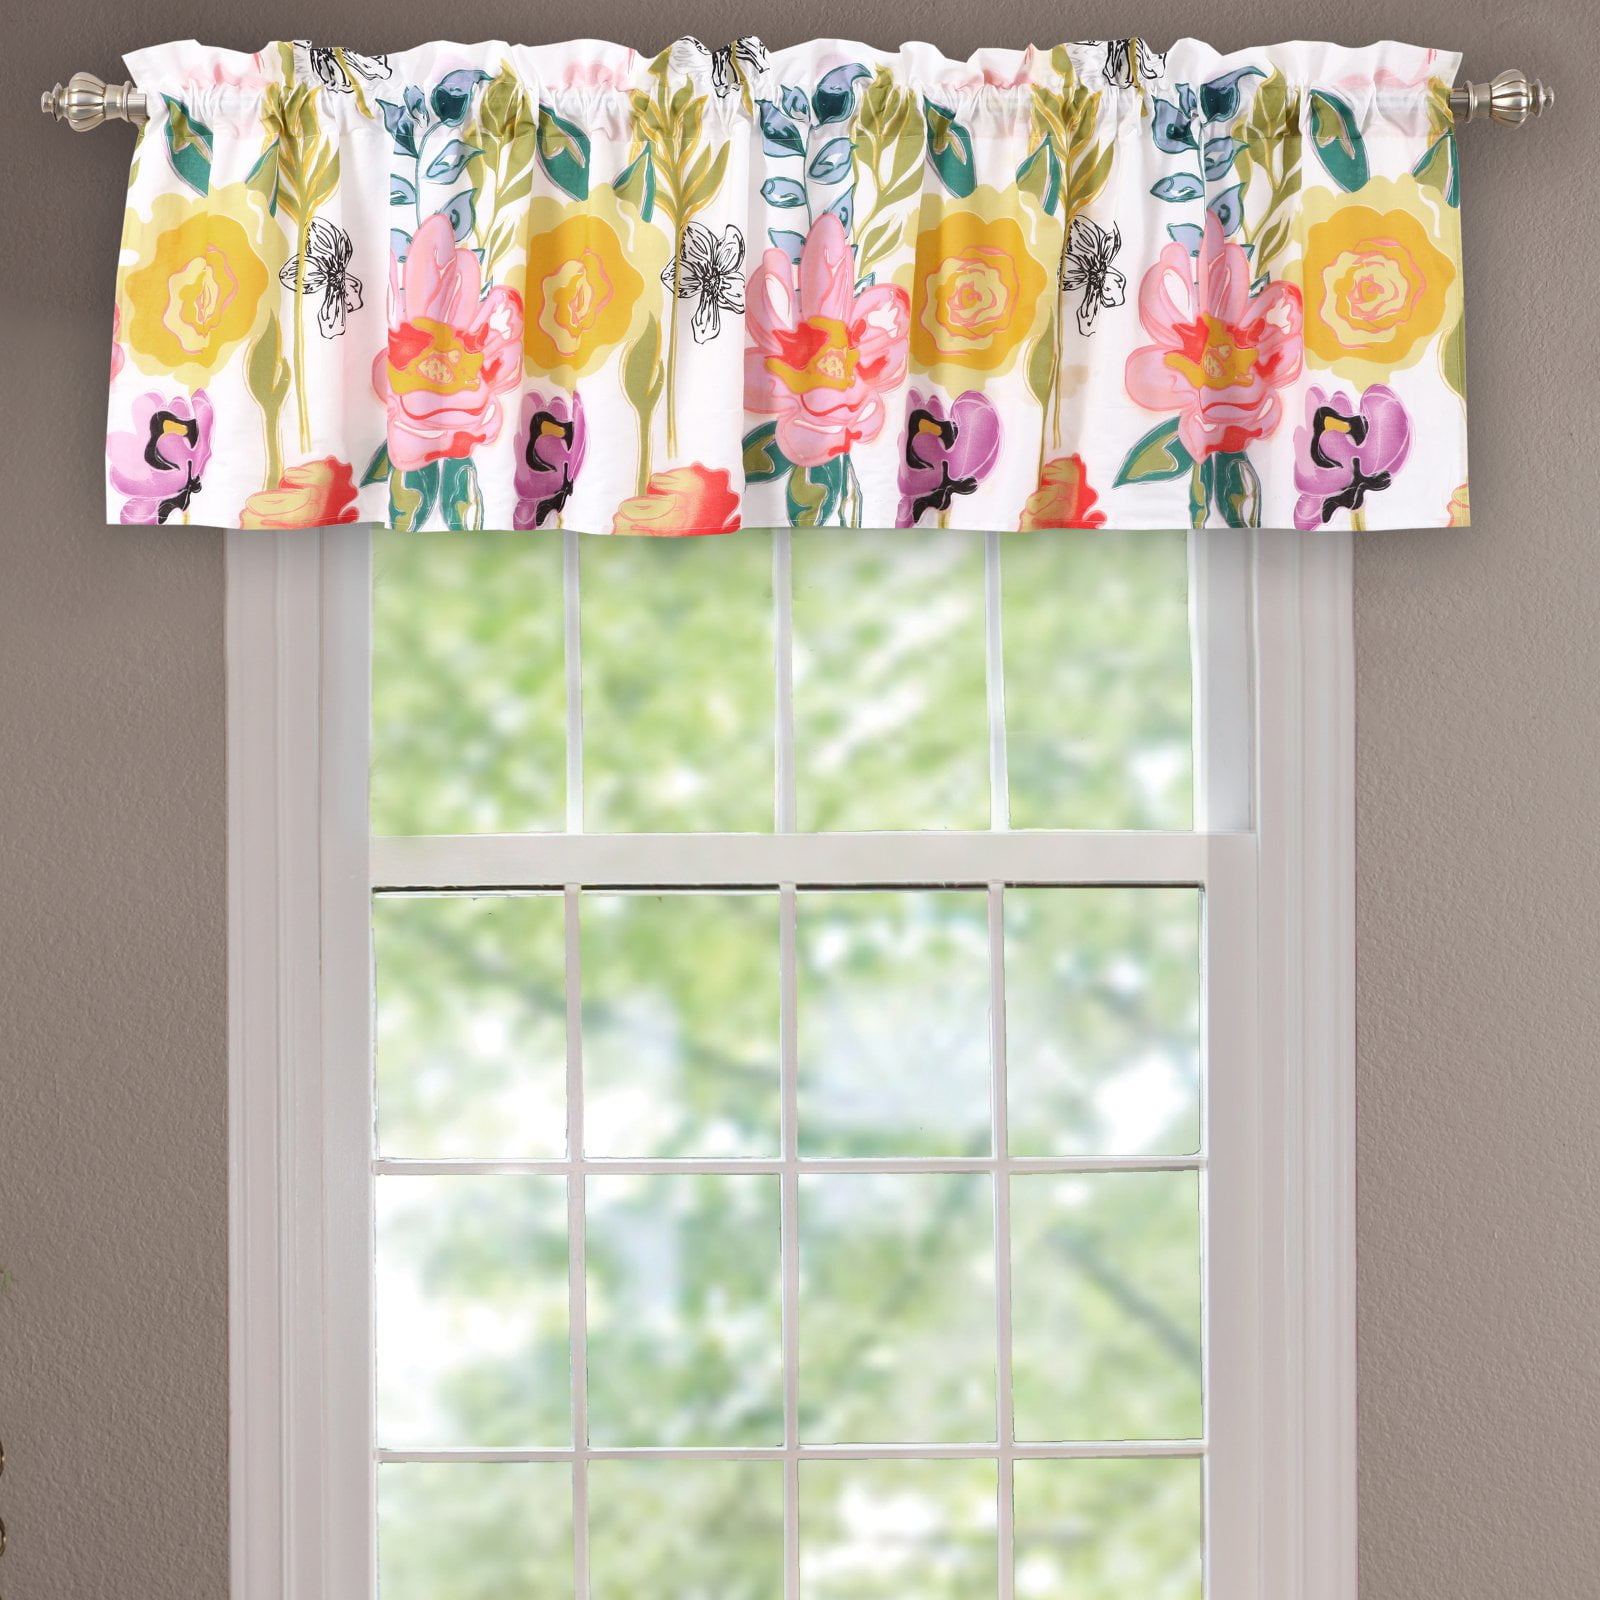 CALICO Curtain Valance Floral WIDE VALANCE Window Curtain Baby Nursery Girls NEW 